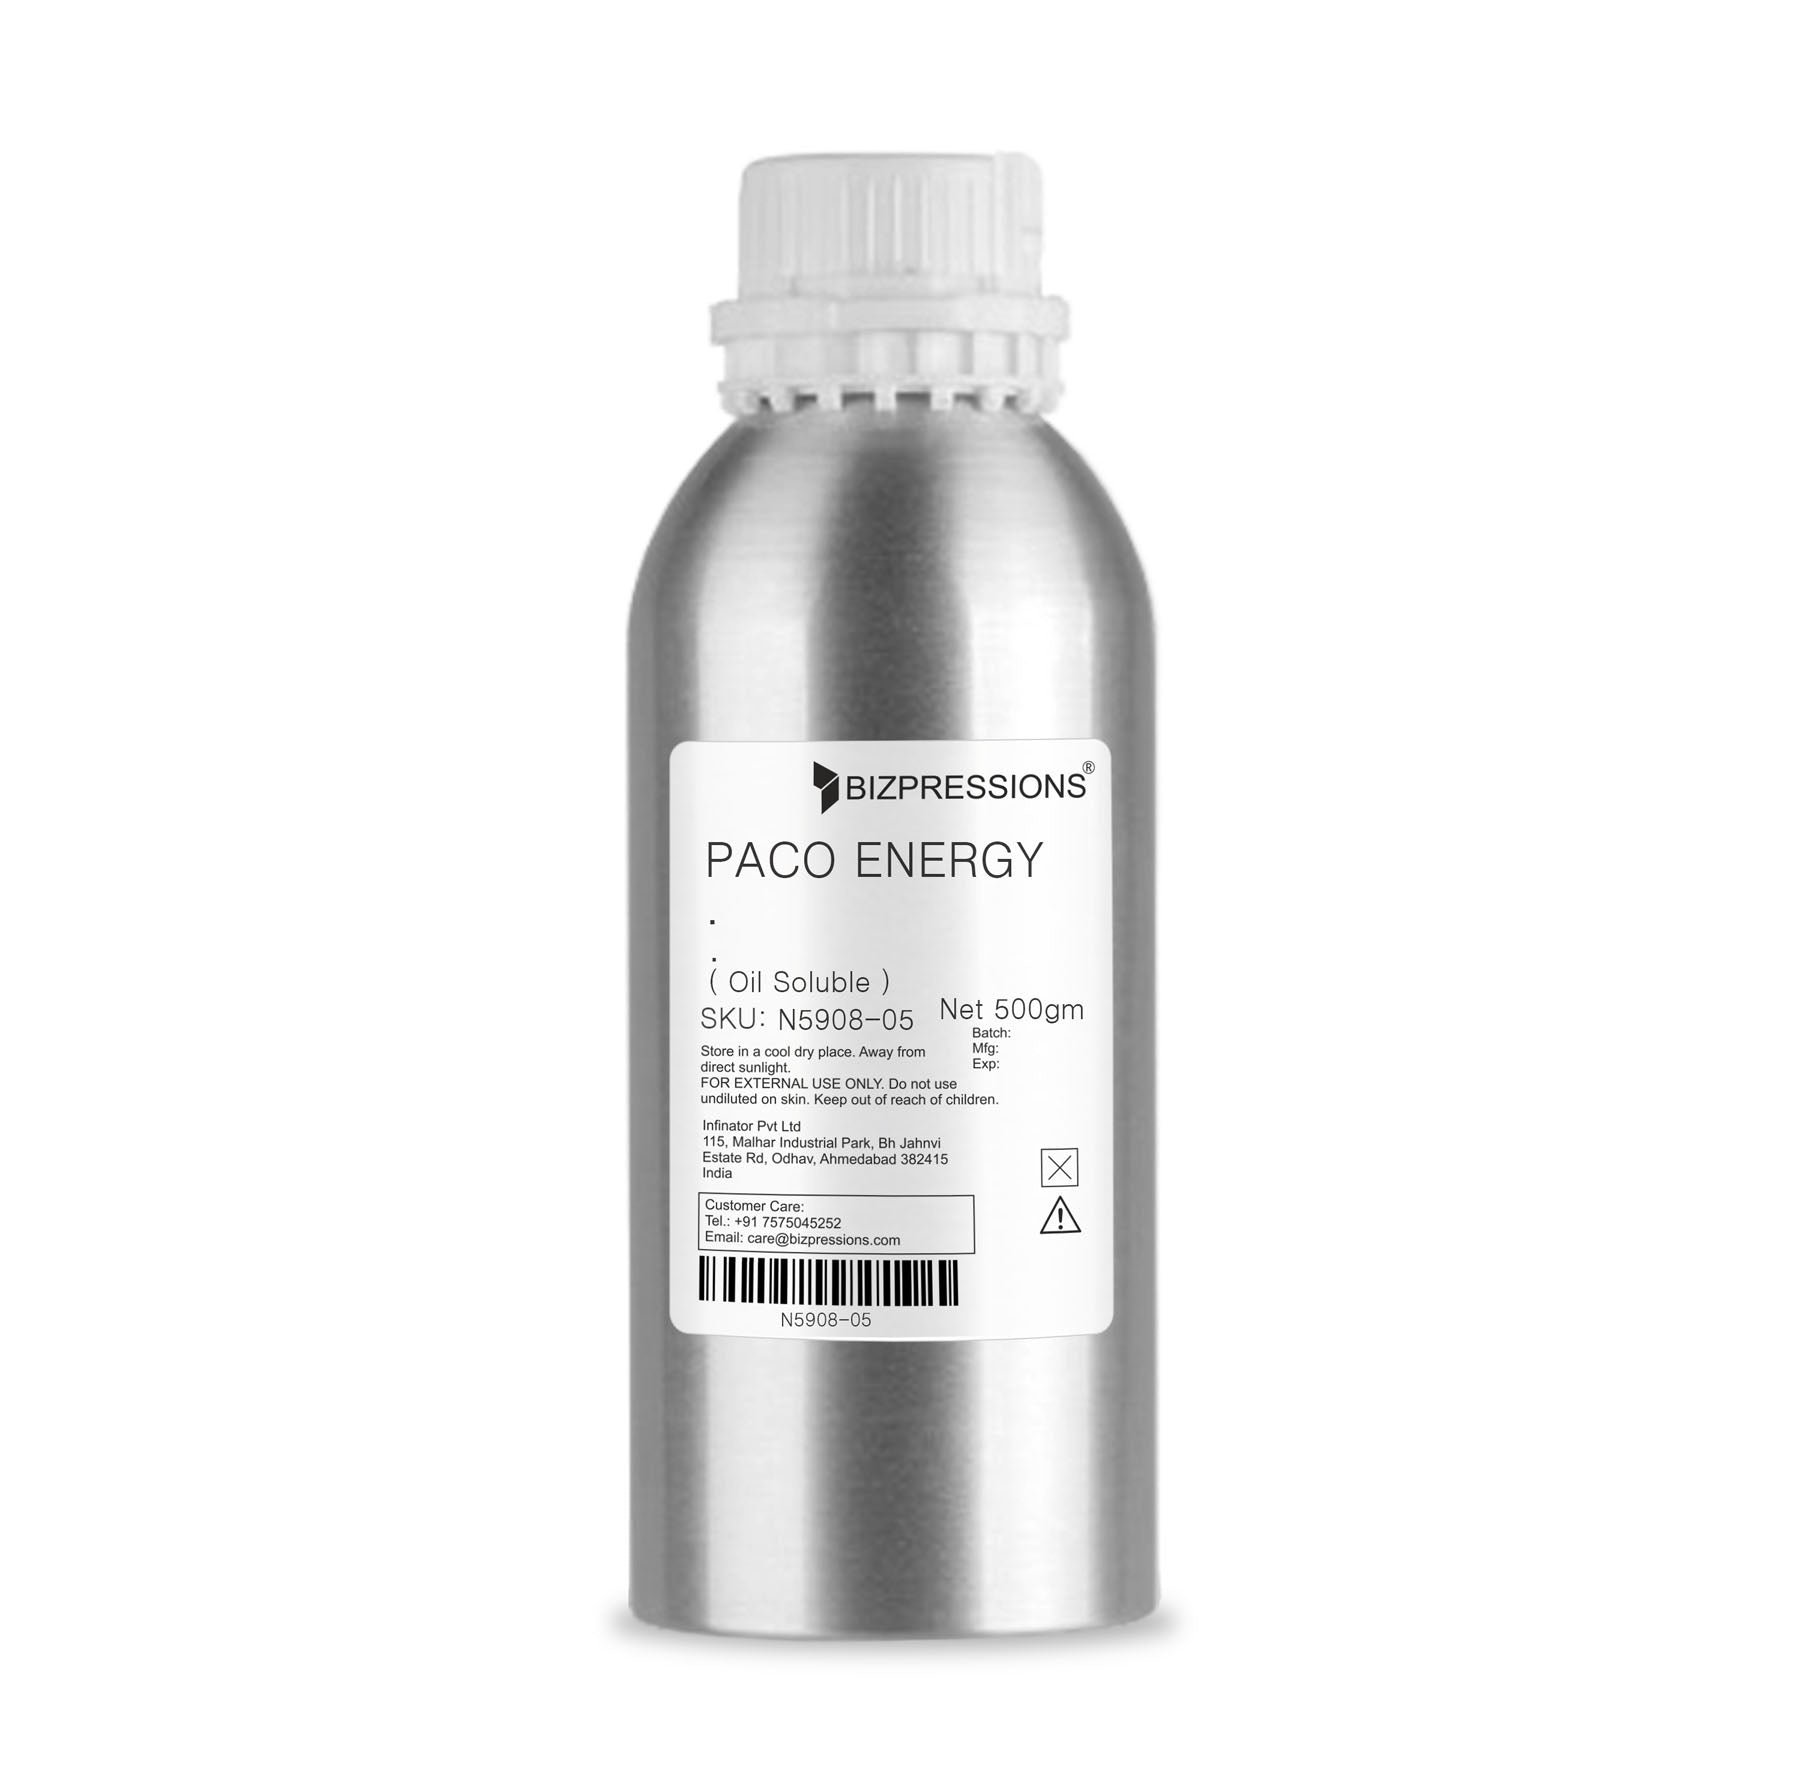 PACO ENERGY - Fragrance ( Oil Soluble ) - 500 gm